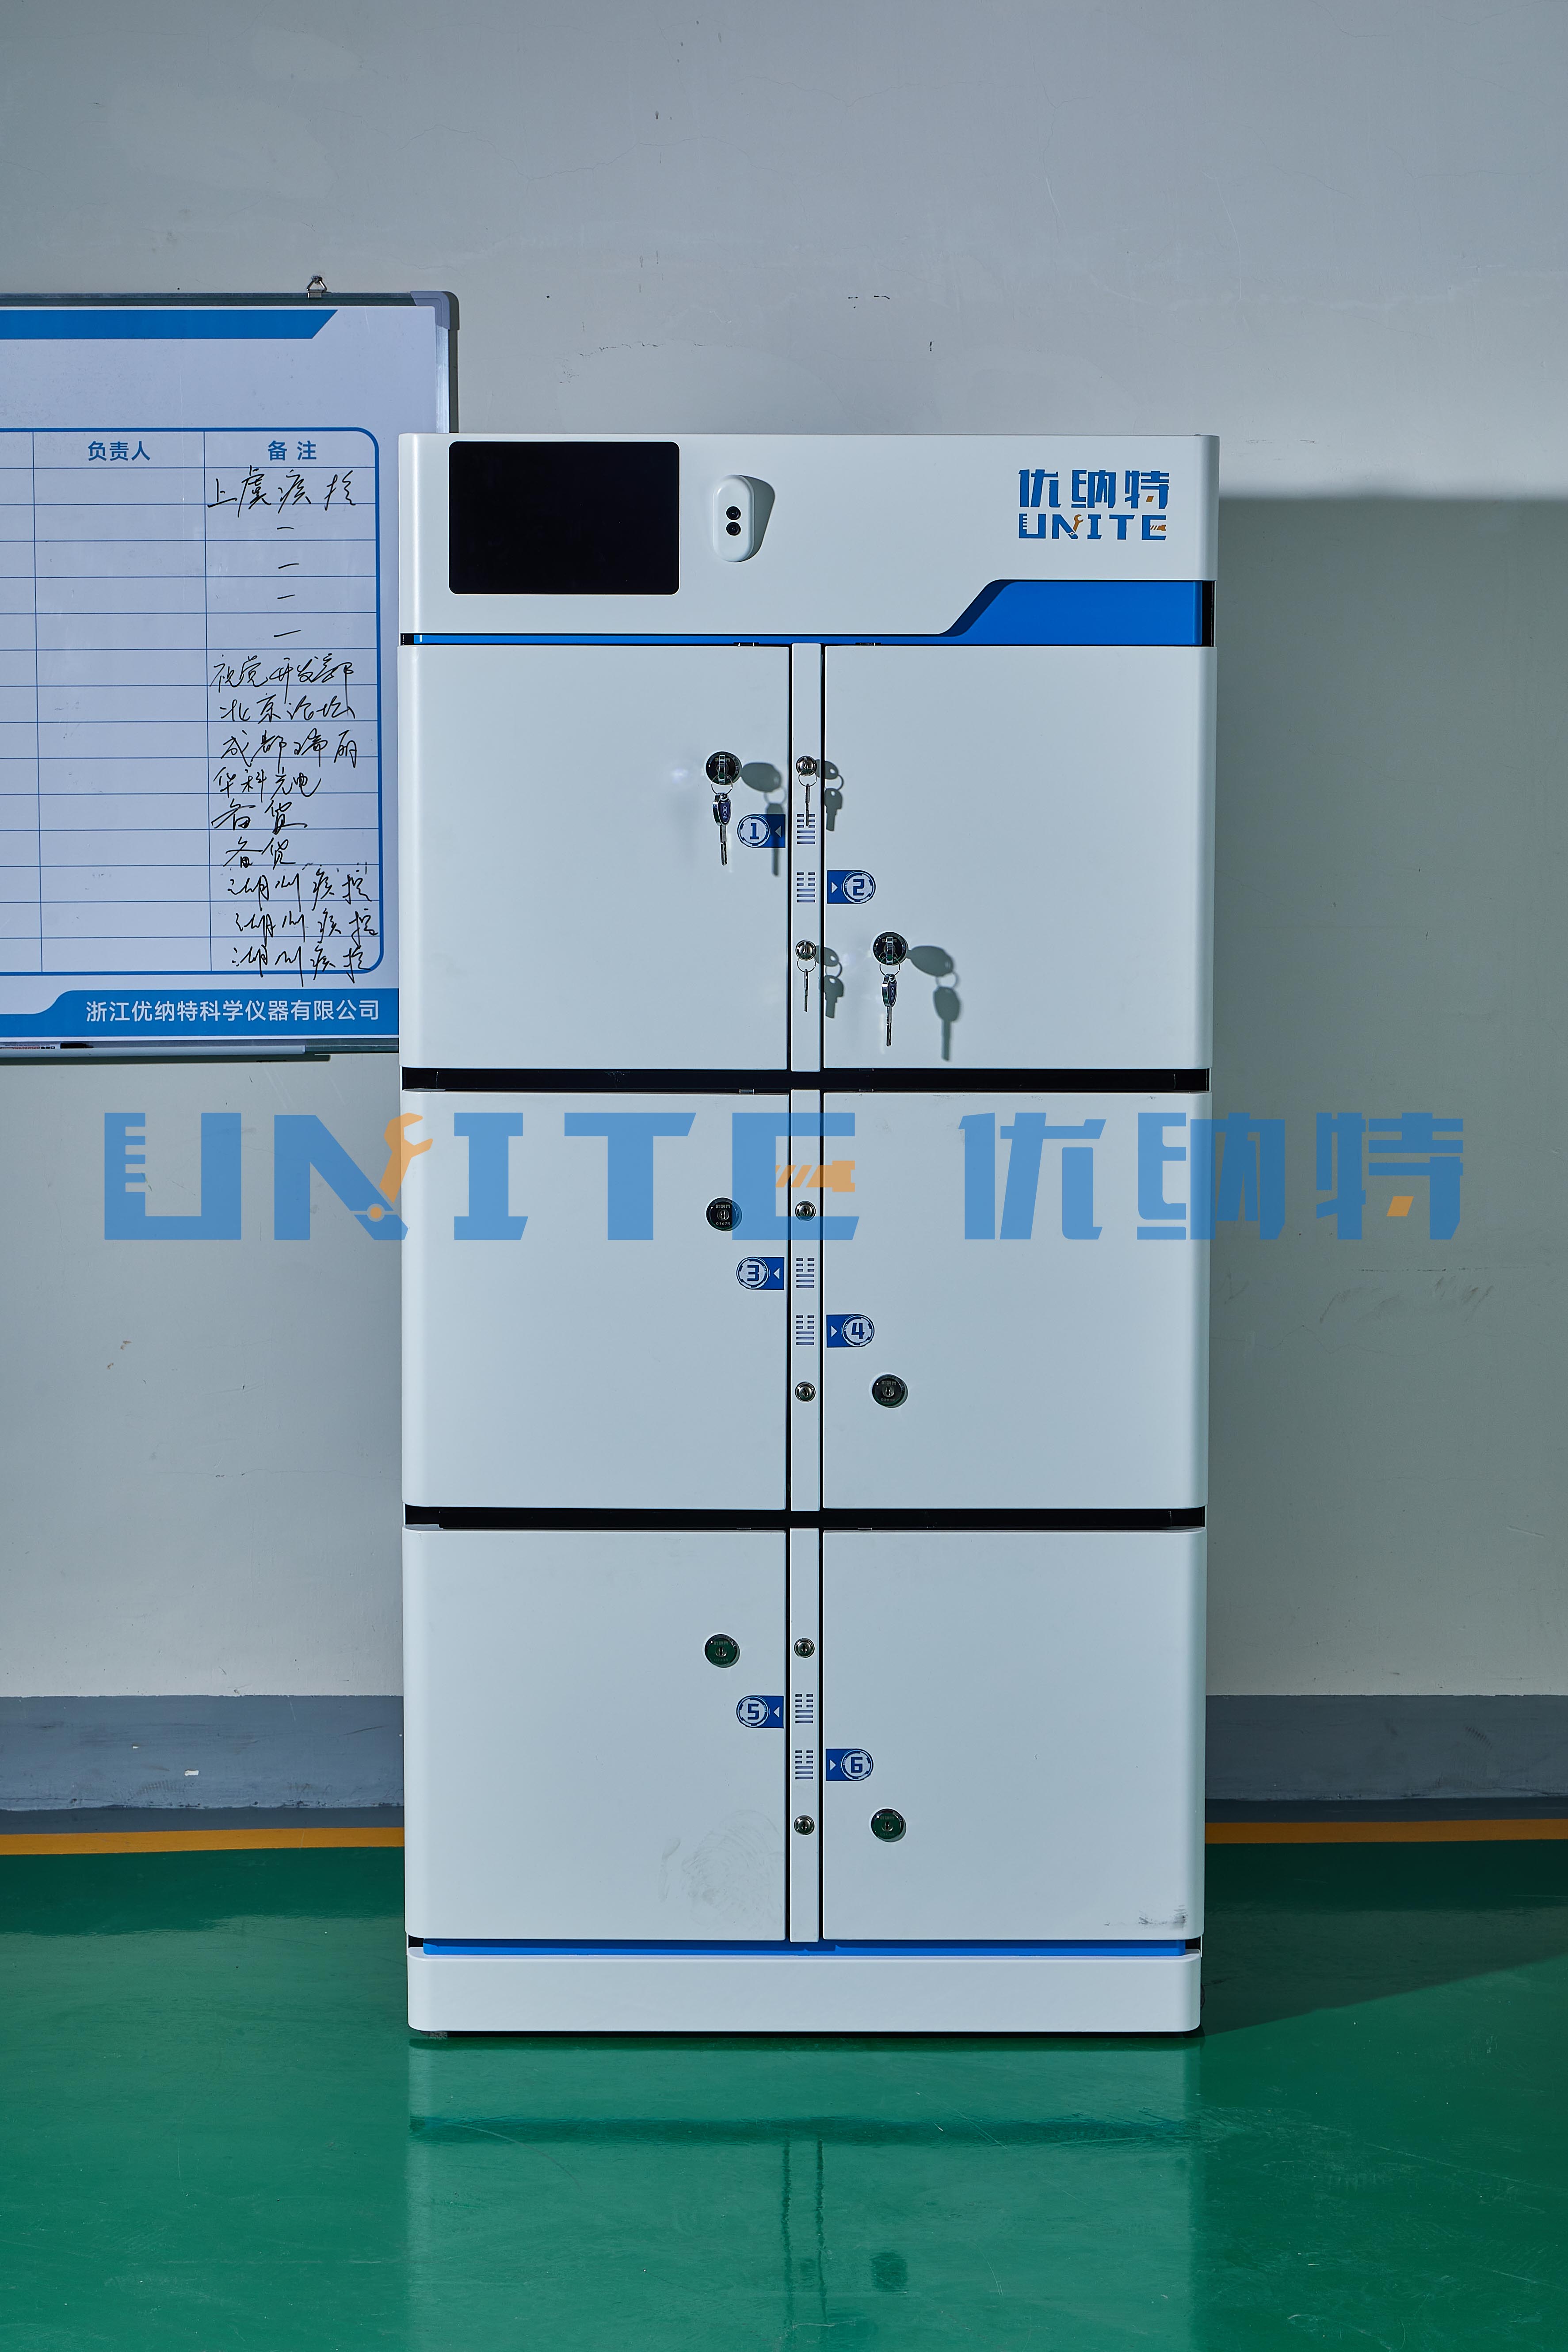 Unite Usample R6.2 Six-Zone Matrix IOT Cabinets For Hazardous Chemicals Management(RFID) For Storage Of Reagents, Consumables